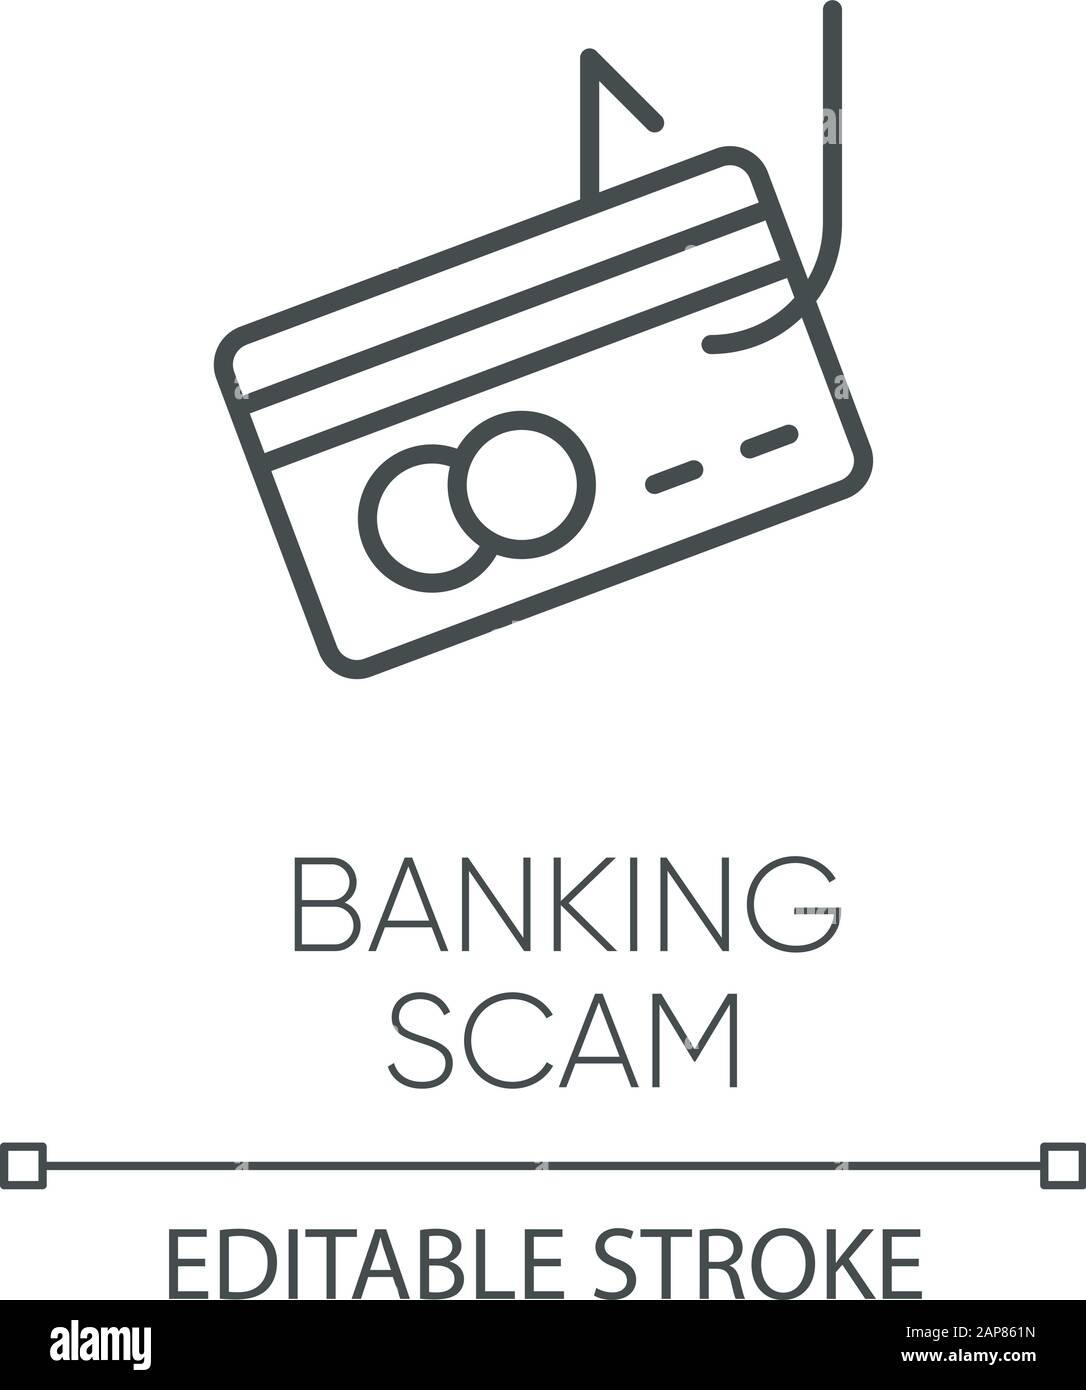 Banking scam linear icon. Skimming. Identity theft. Credit card phishing. Financial fraud. Fake loan offer. Thin line illustration. Contour symbol. Ve Stock Vector